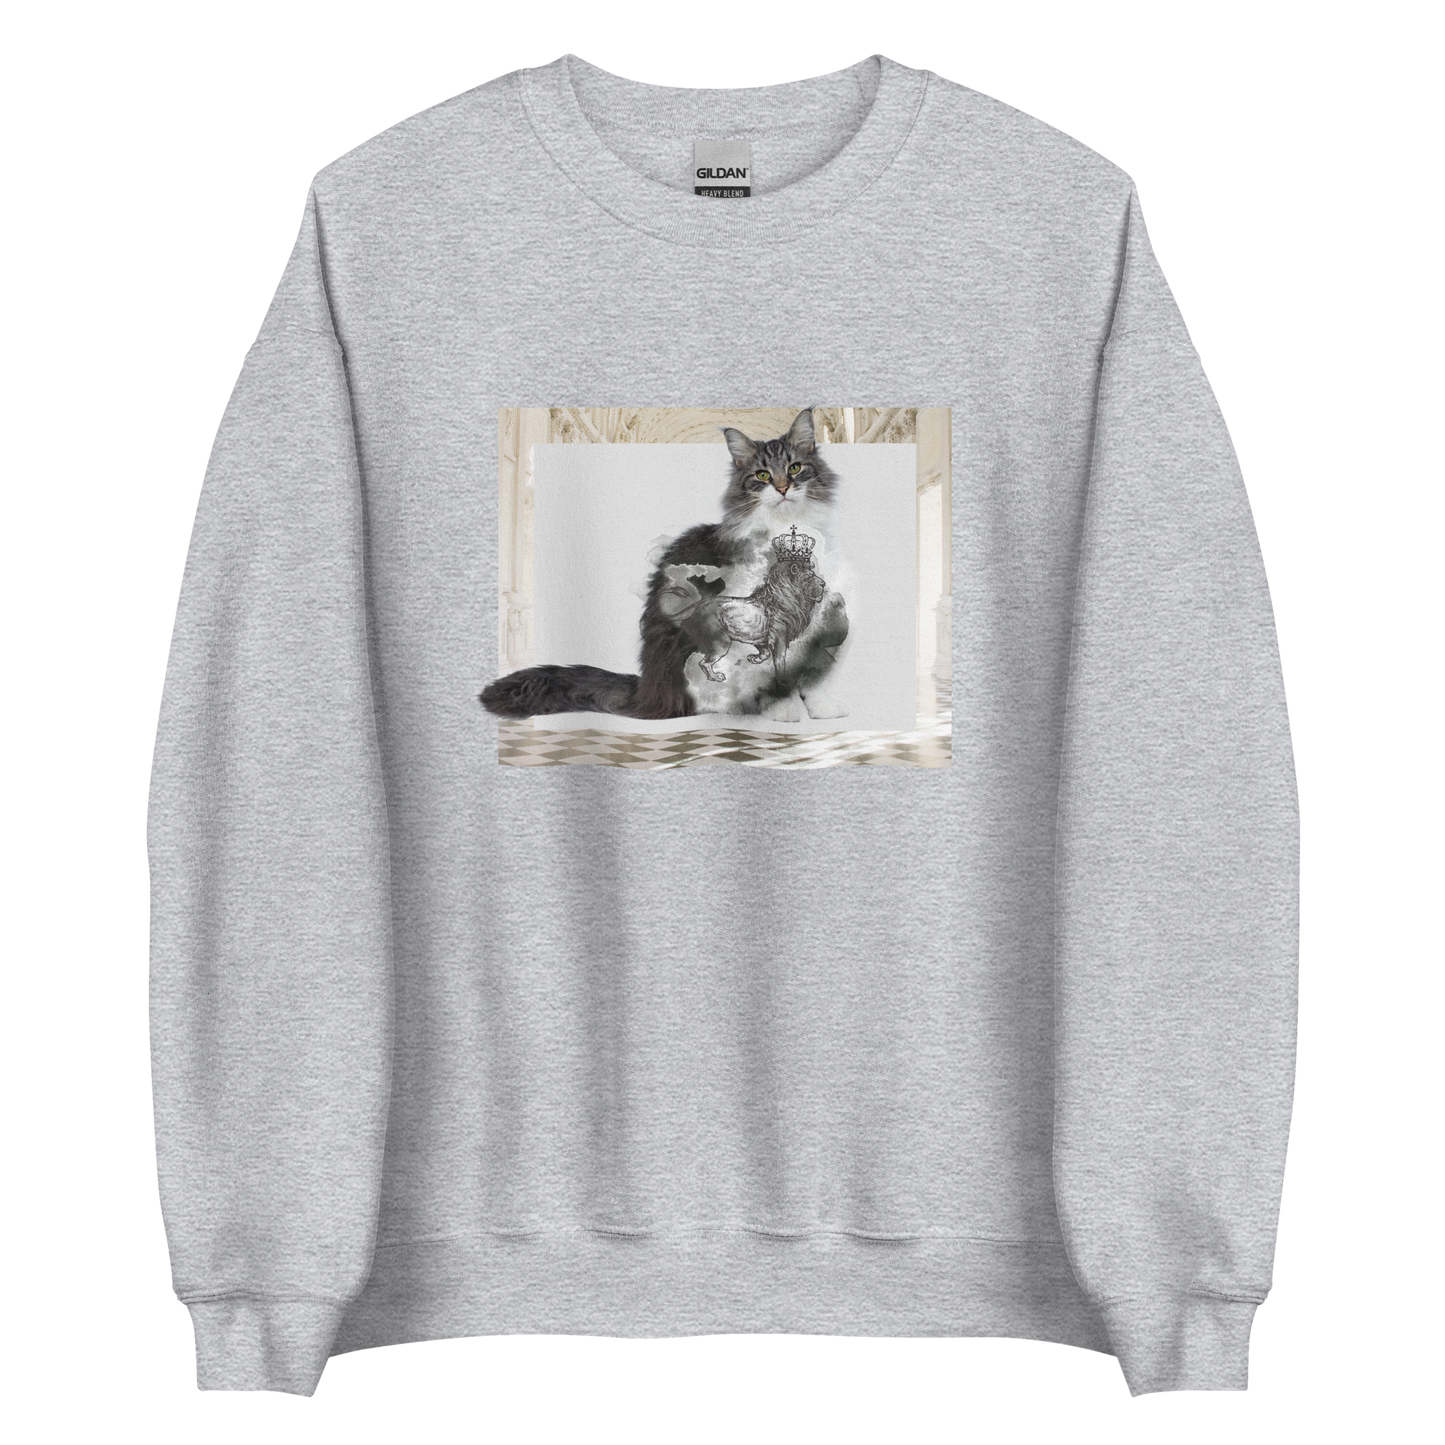 Sport Grey Royal Cat Sweatshirt featuring a Majestic Cat graphic on the chest - Cute Graphic Cat Sweatshirts - Boozy Fox